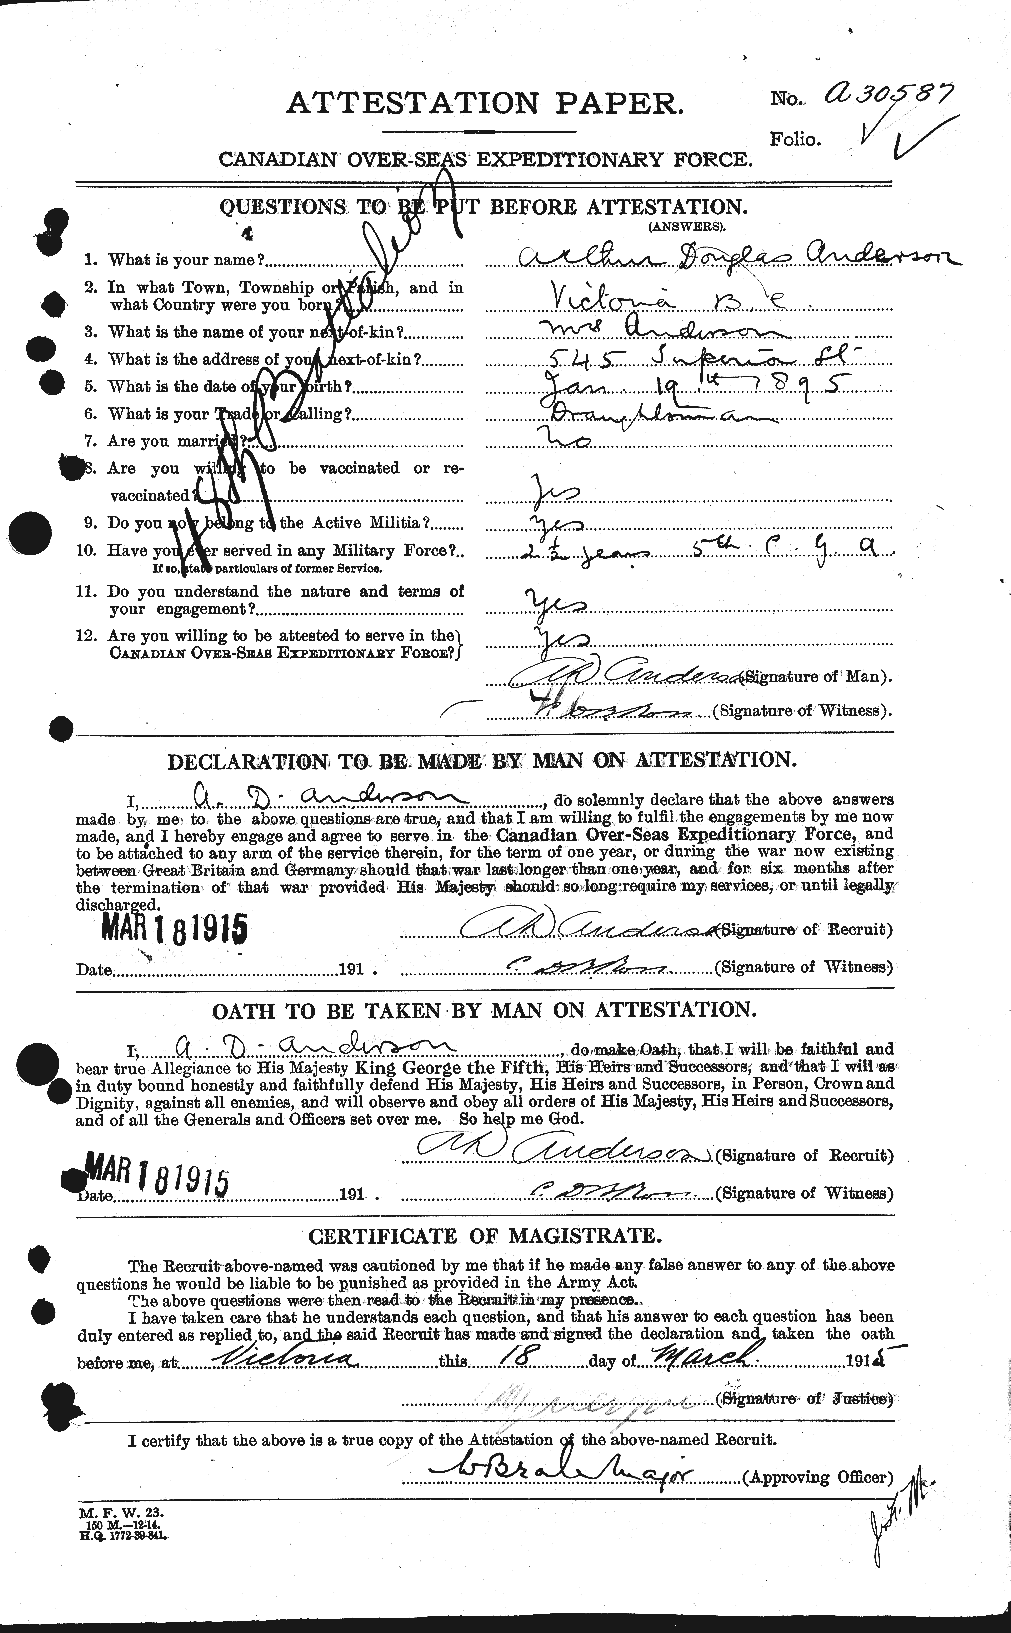 Personnel Records of the First World War - CEF 209362a